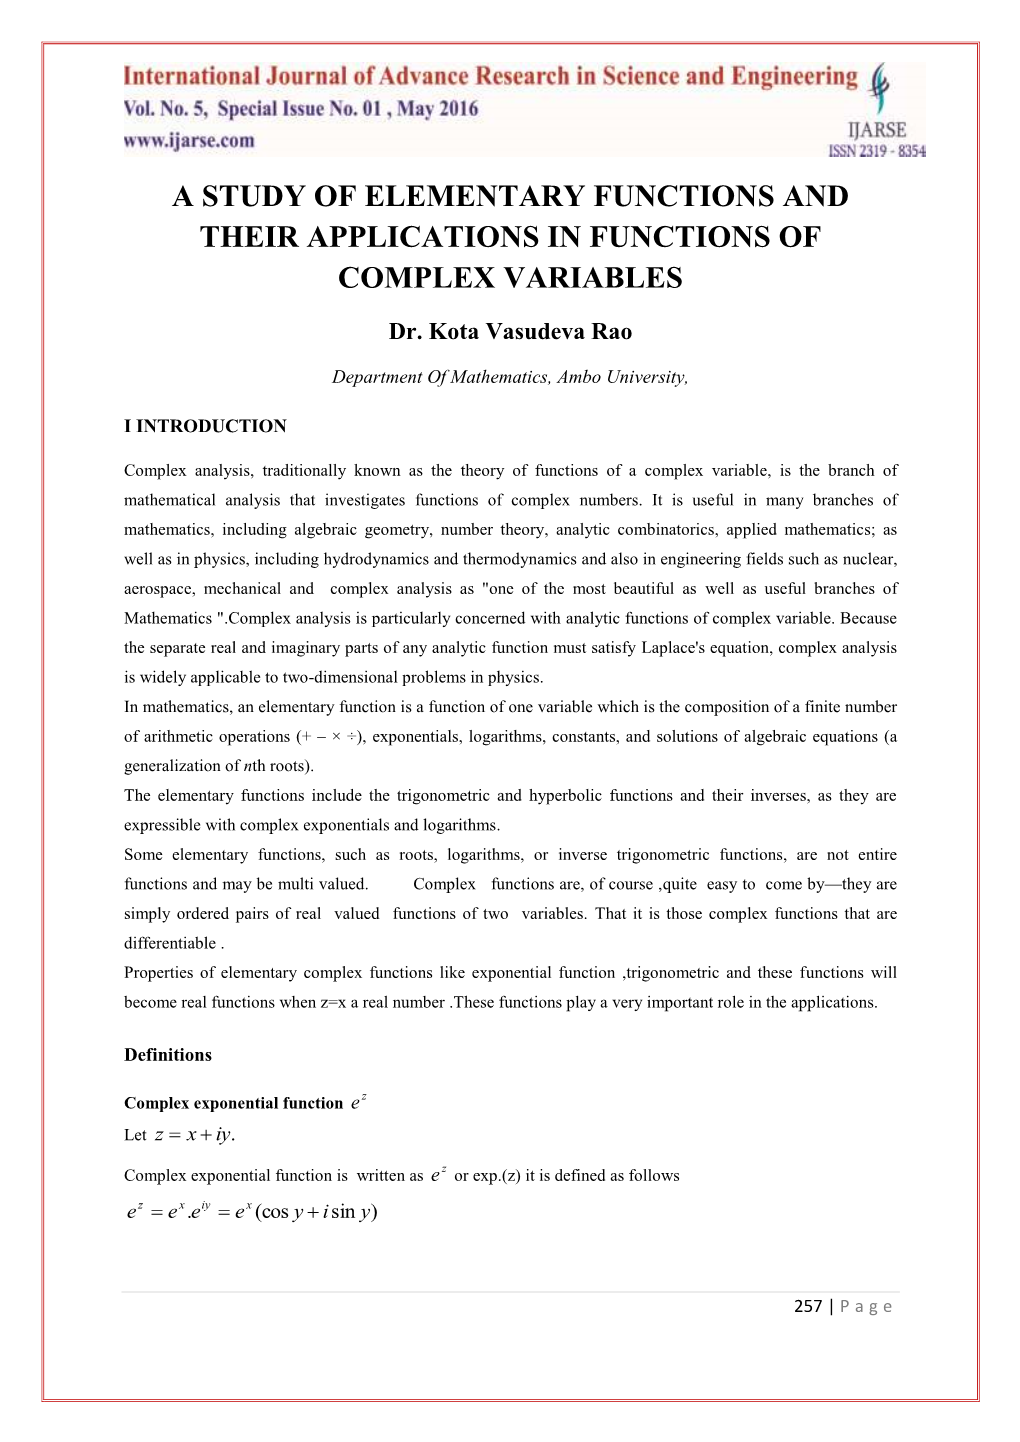 A Study of Elementary Functions and Their Applications in Functions of Complex Variables